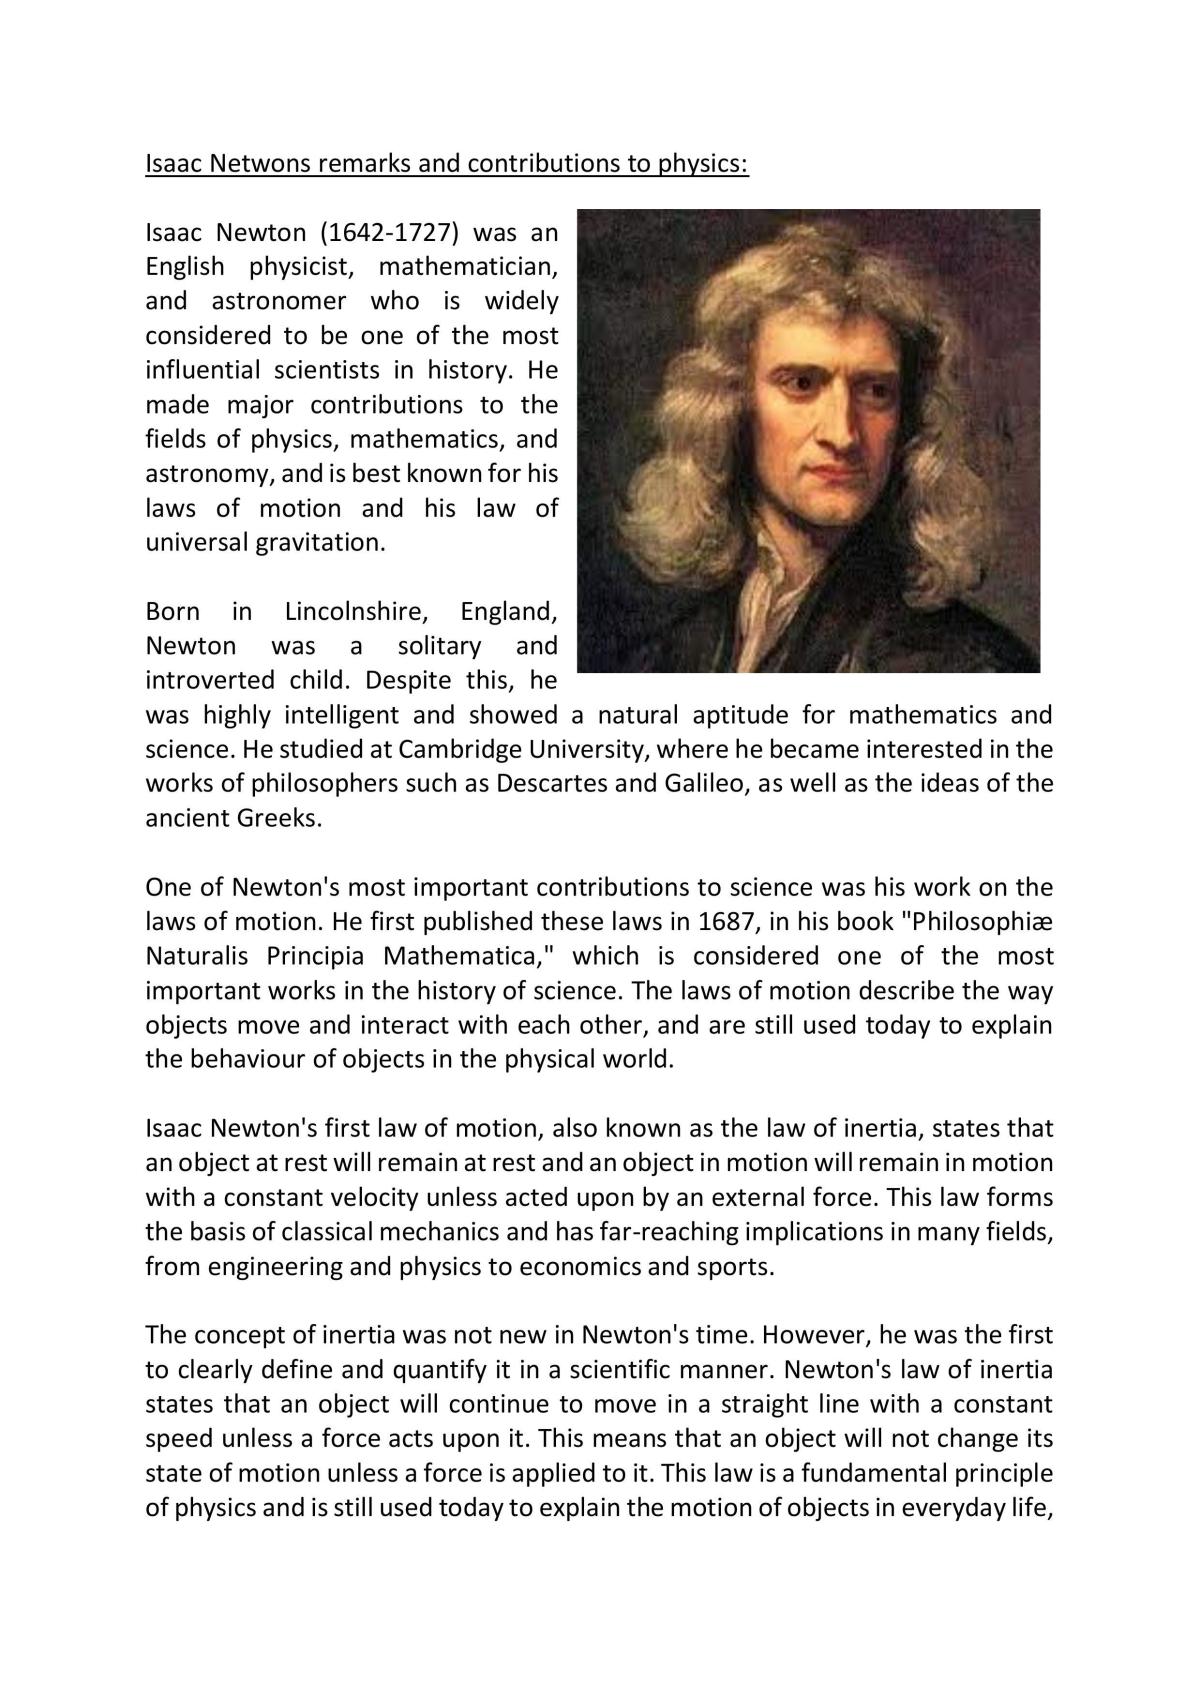 Isaac Newton's remarks and contributions to physics - Page 1